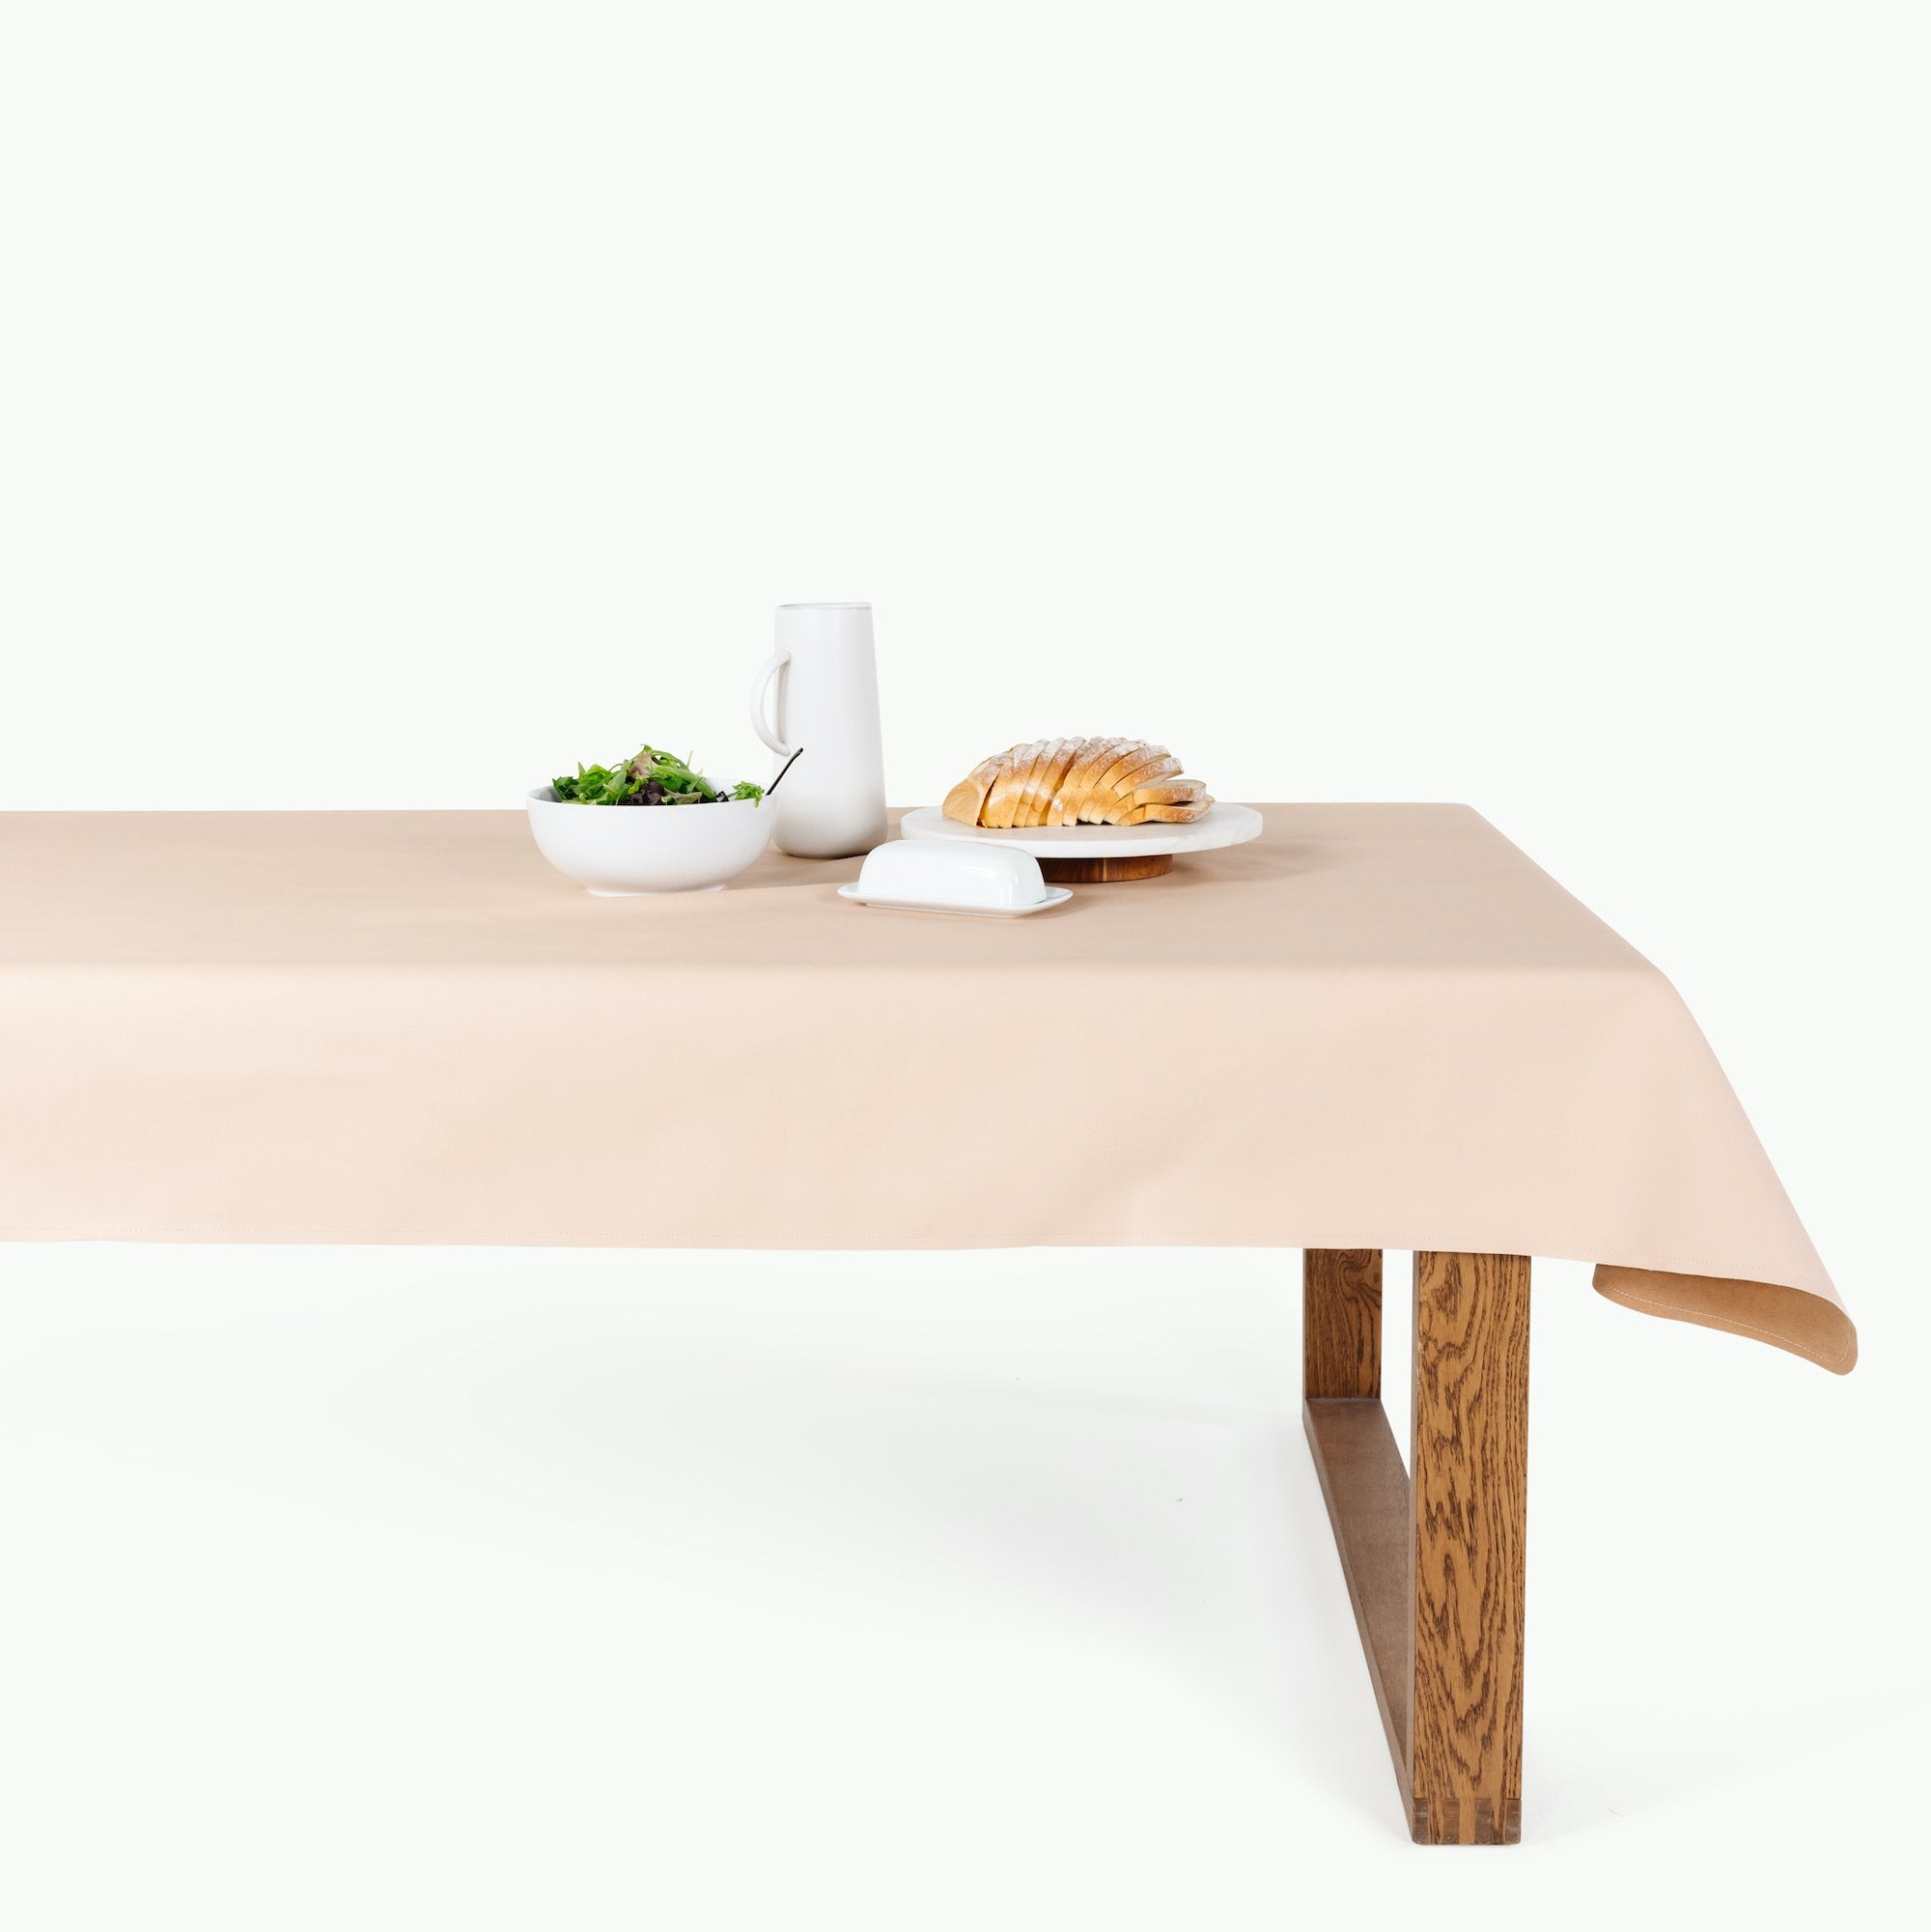 Pomelo (on sale) / 8 Foot@Overhead Pomelo Tablecloth on table